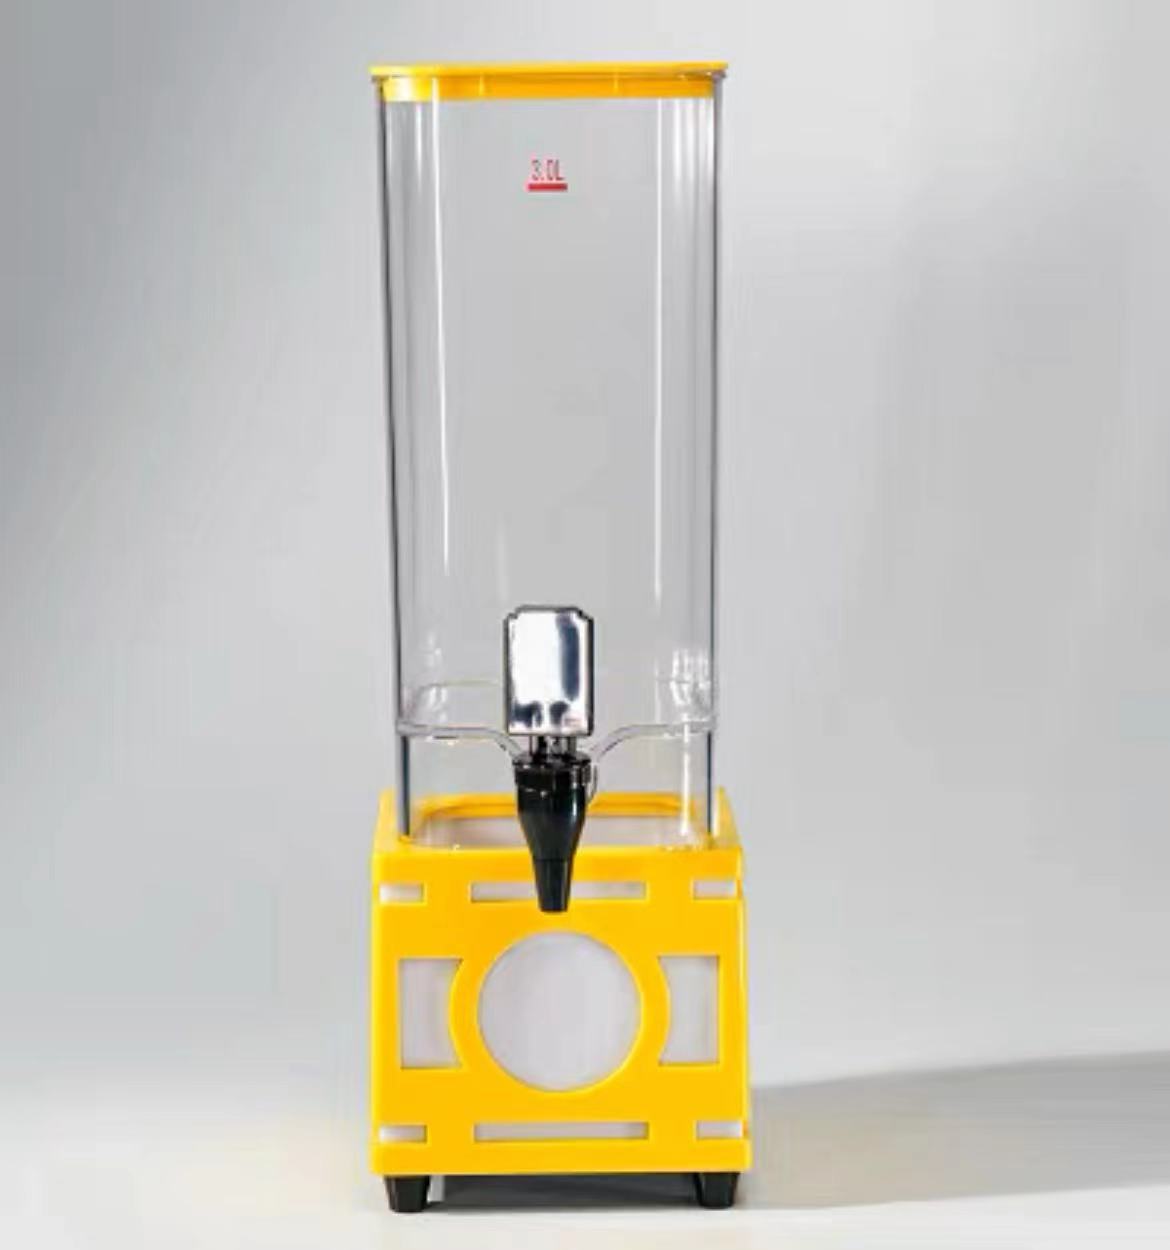 Beer Dispenser with LED Light 3 L, Margarita Mimosa Tower Drink Dispen –  PartyRay